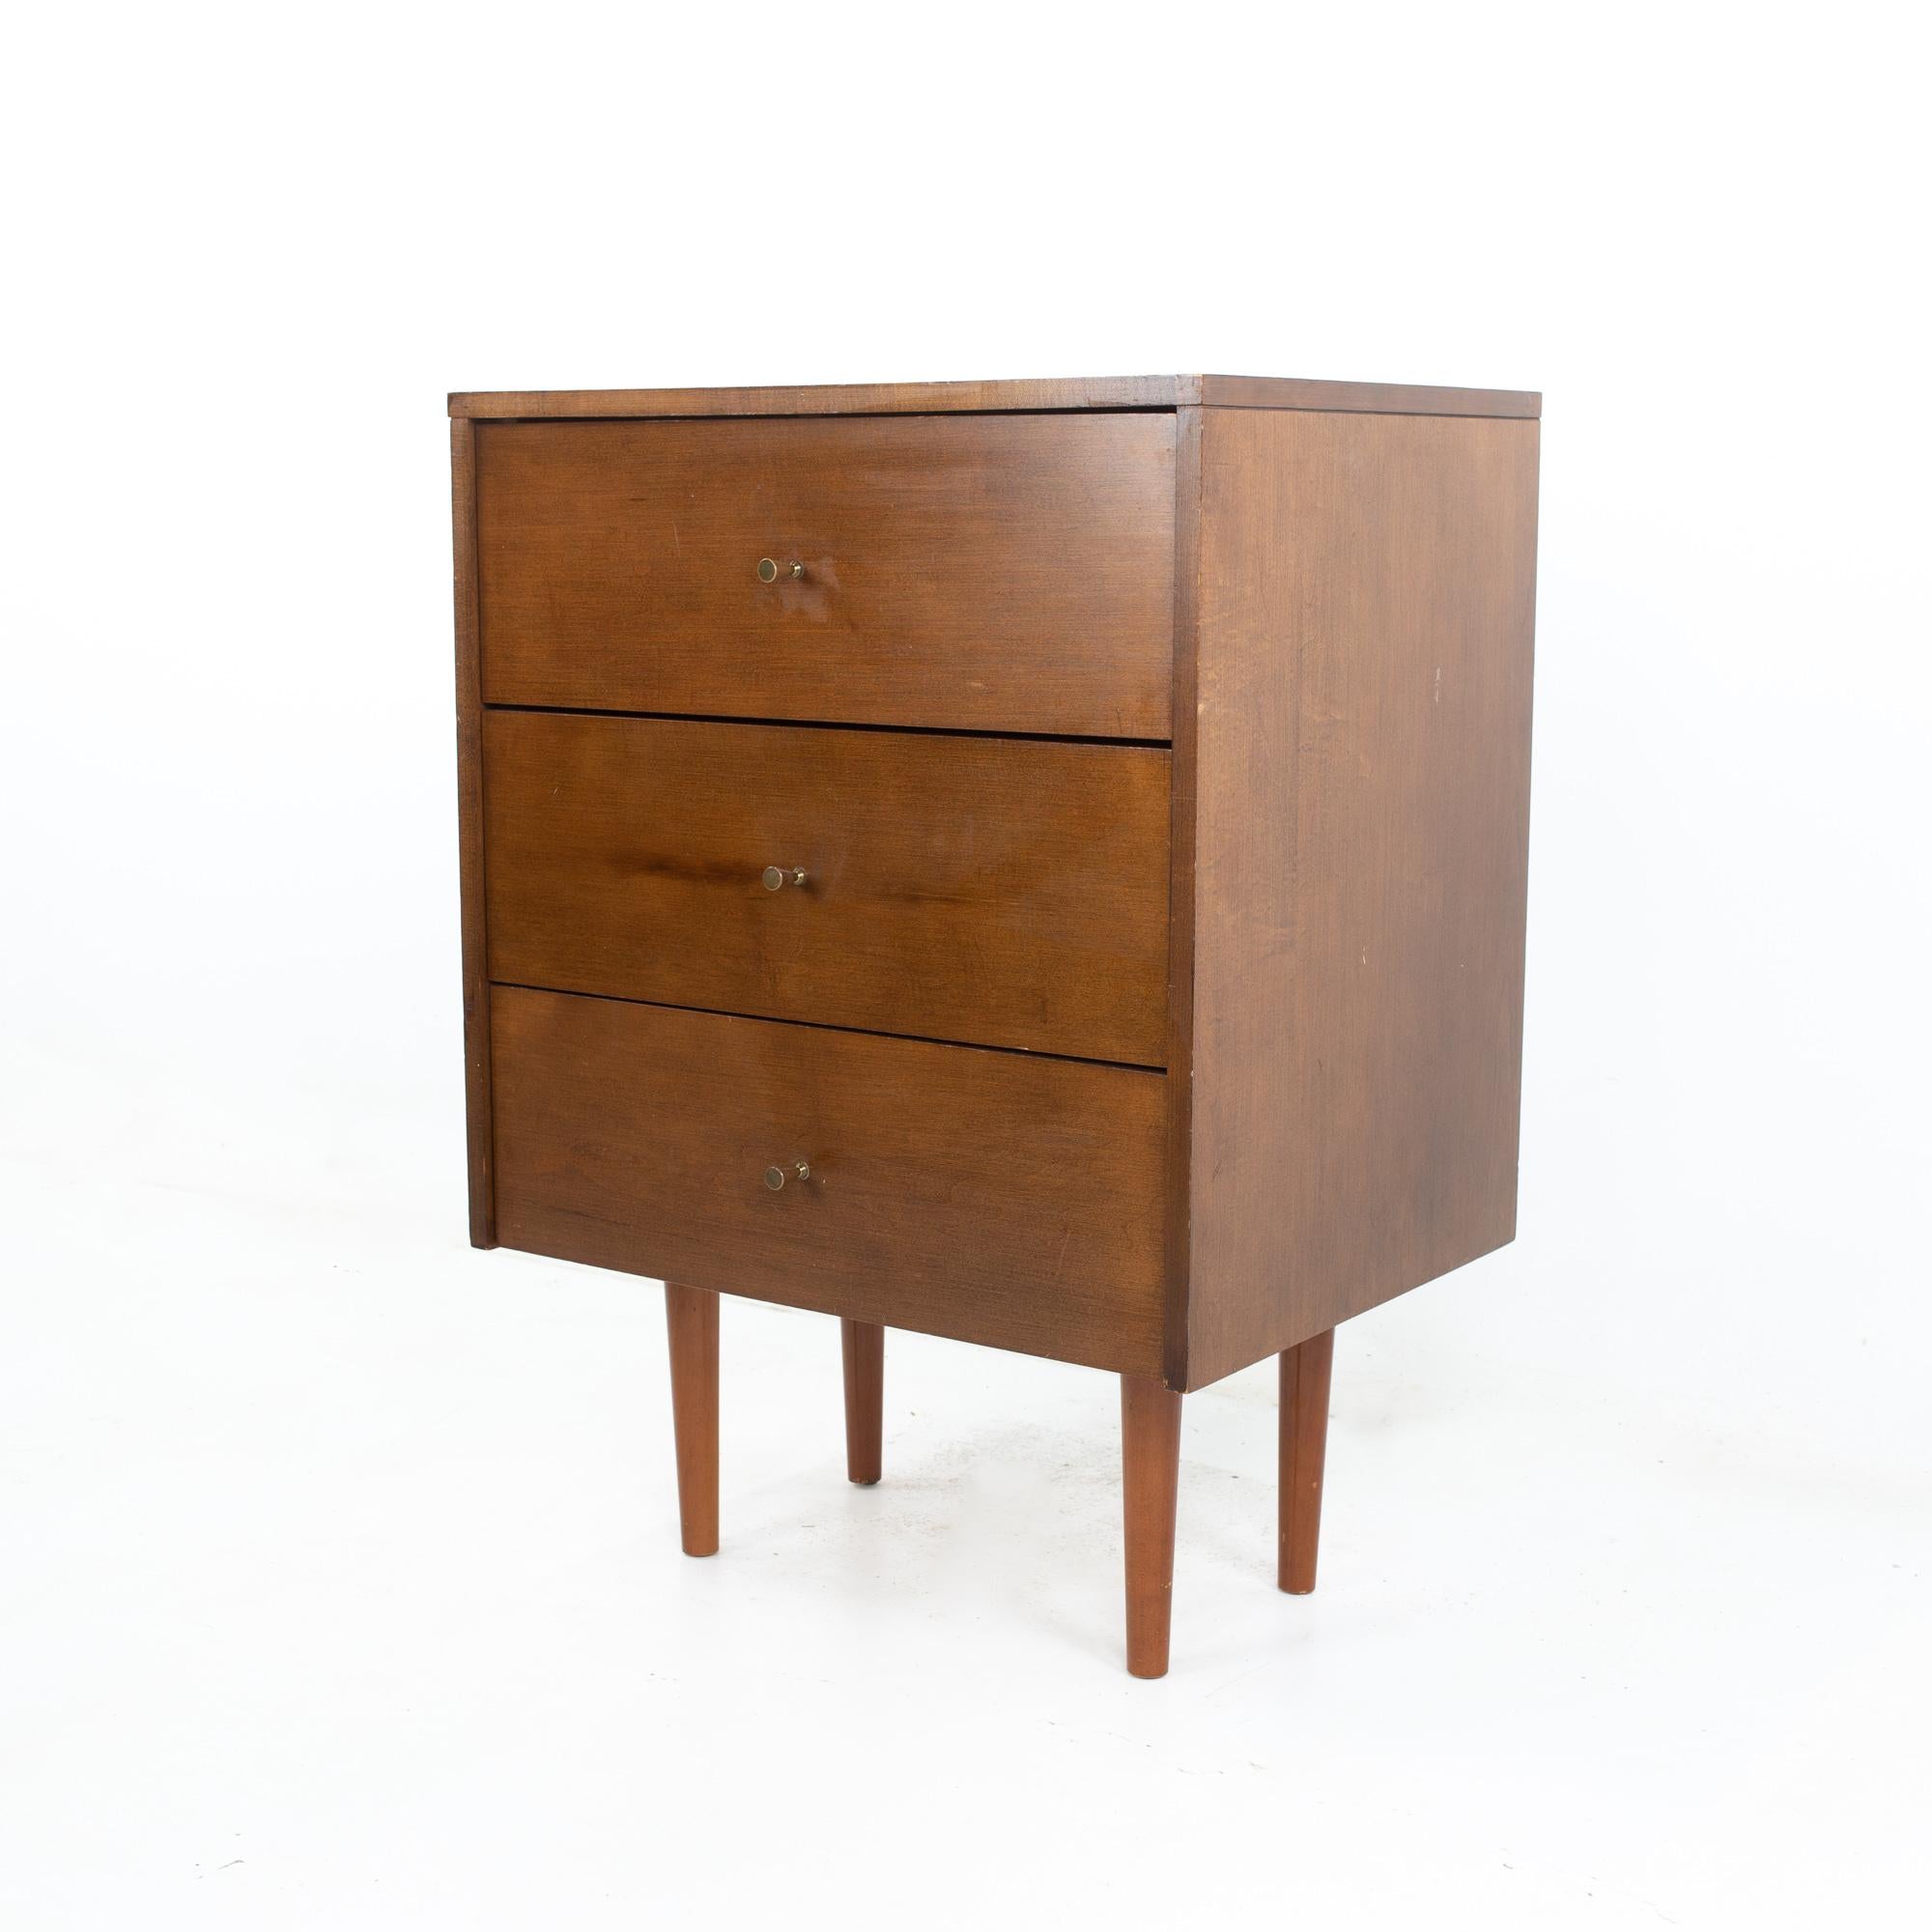 Paul McCobb for Planner Group mid century 3 drawer nightstand dresser chest
Nightstand measures: 24 wide x 18 deep x 34 inches high

All pieces of furniture can be had in what we call restored vintage condition. That means the piece is restored